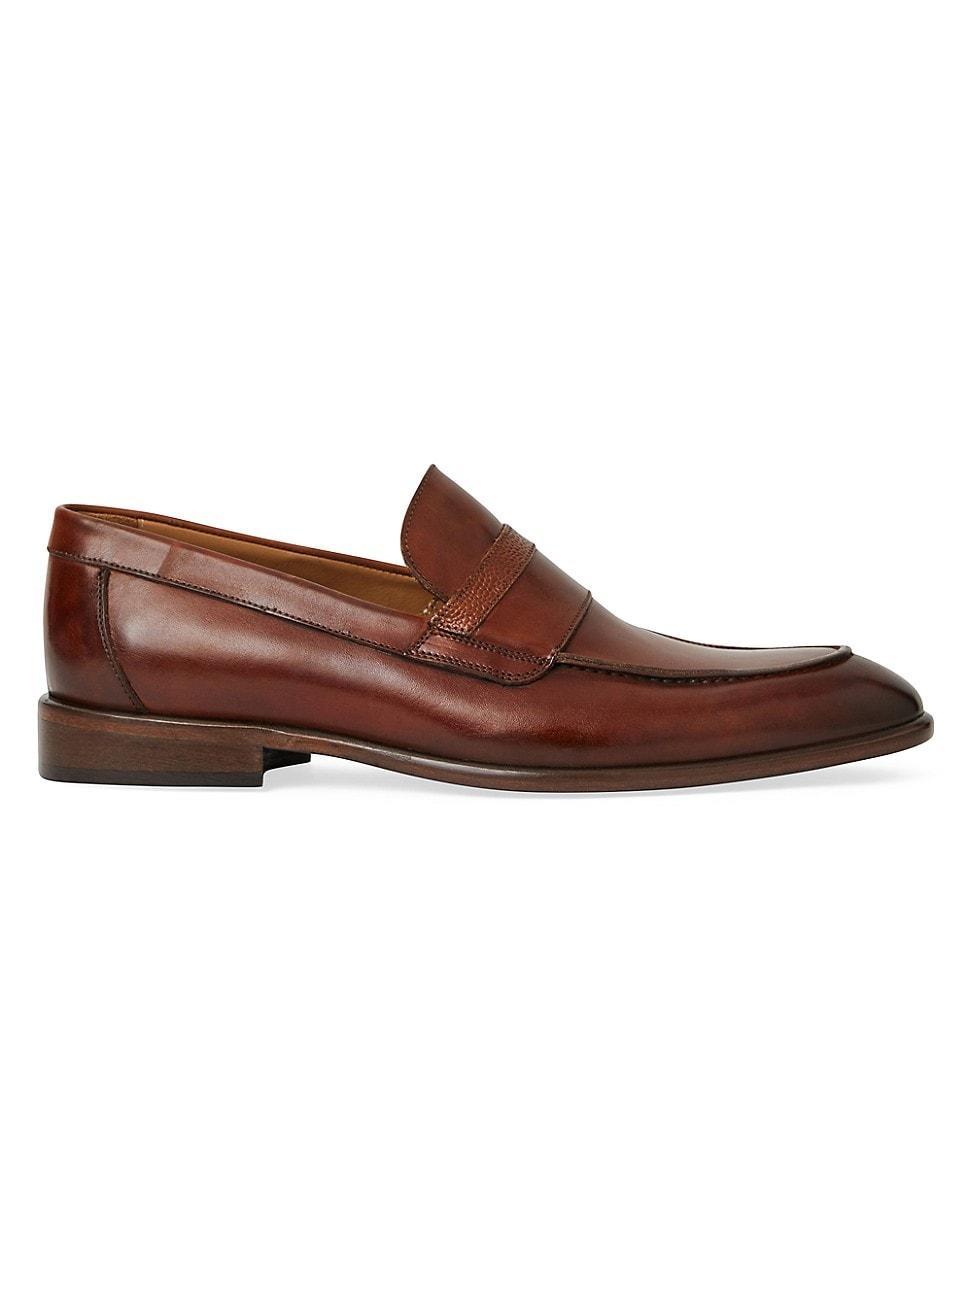 Mens Silvestro Burnished Leather Loafers Product Image